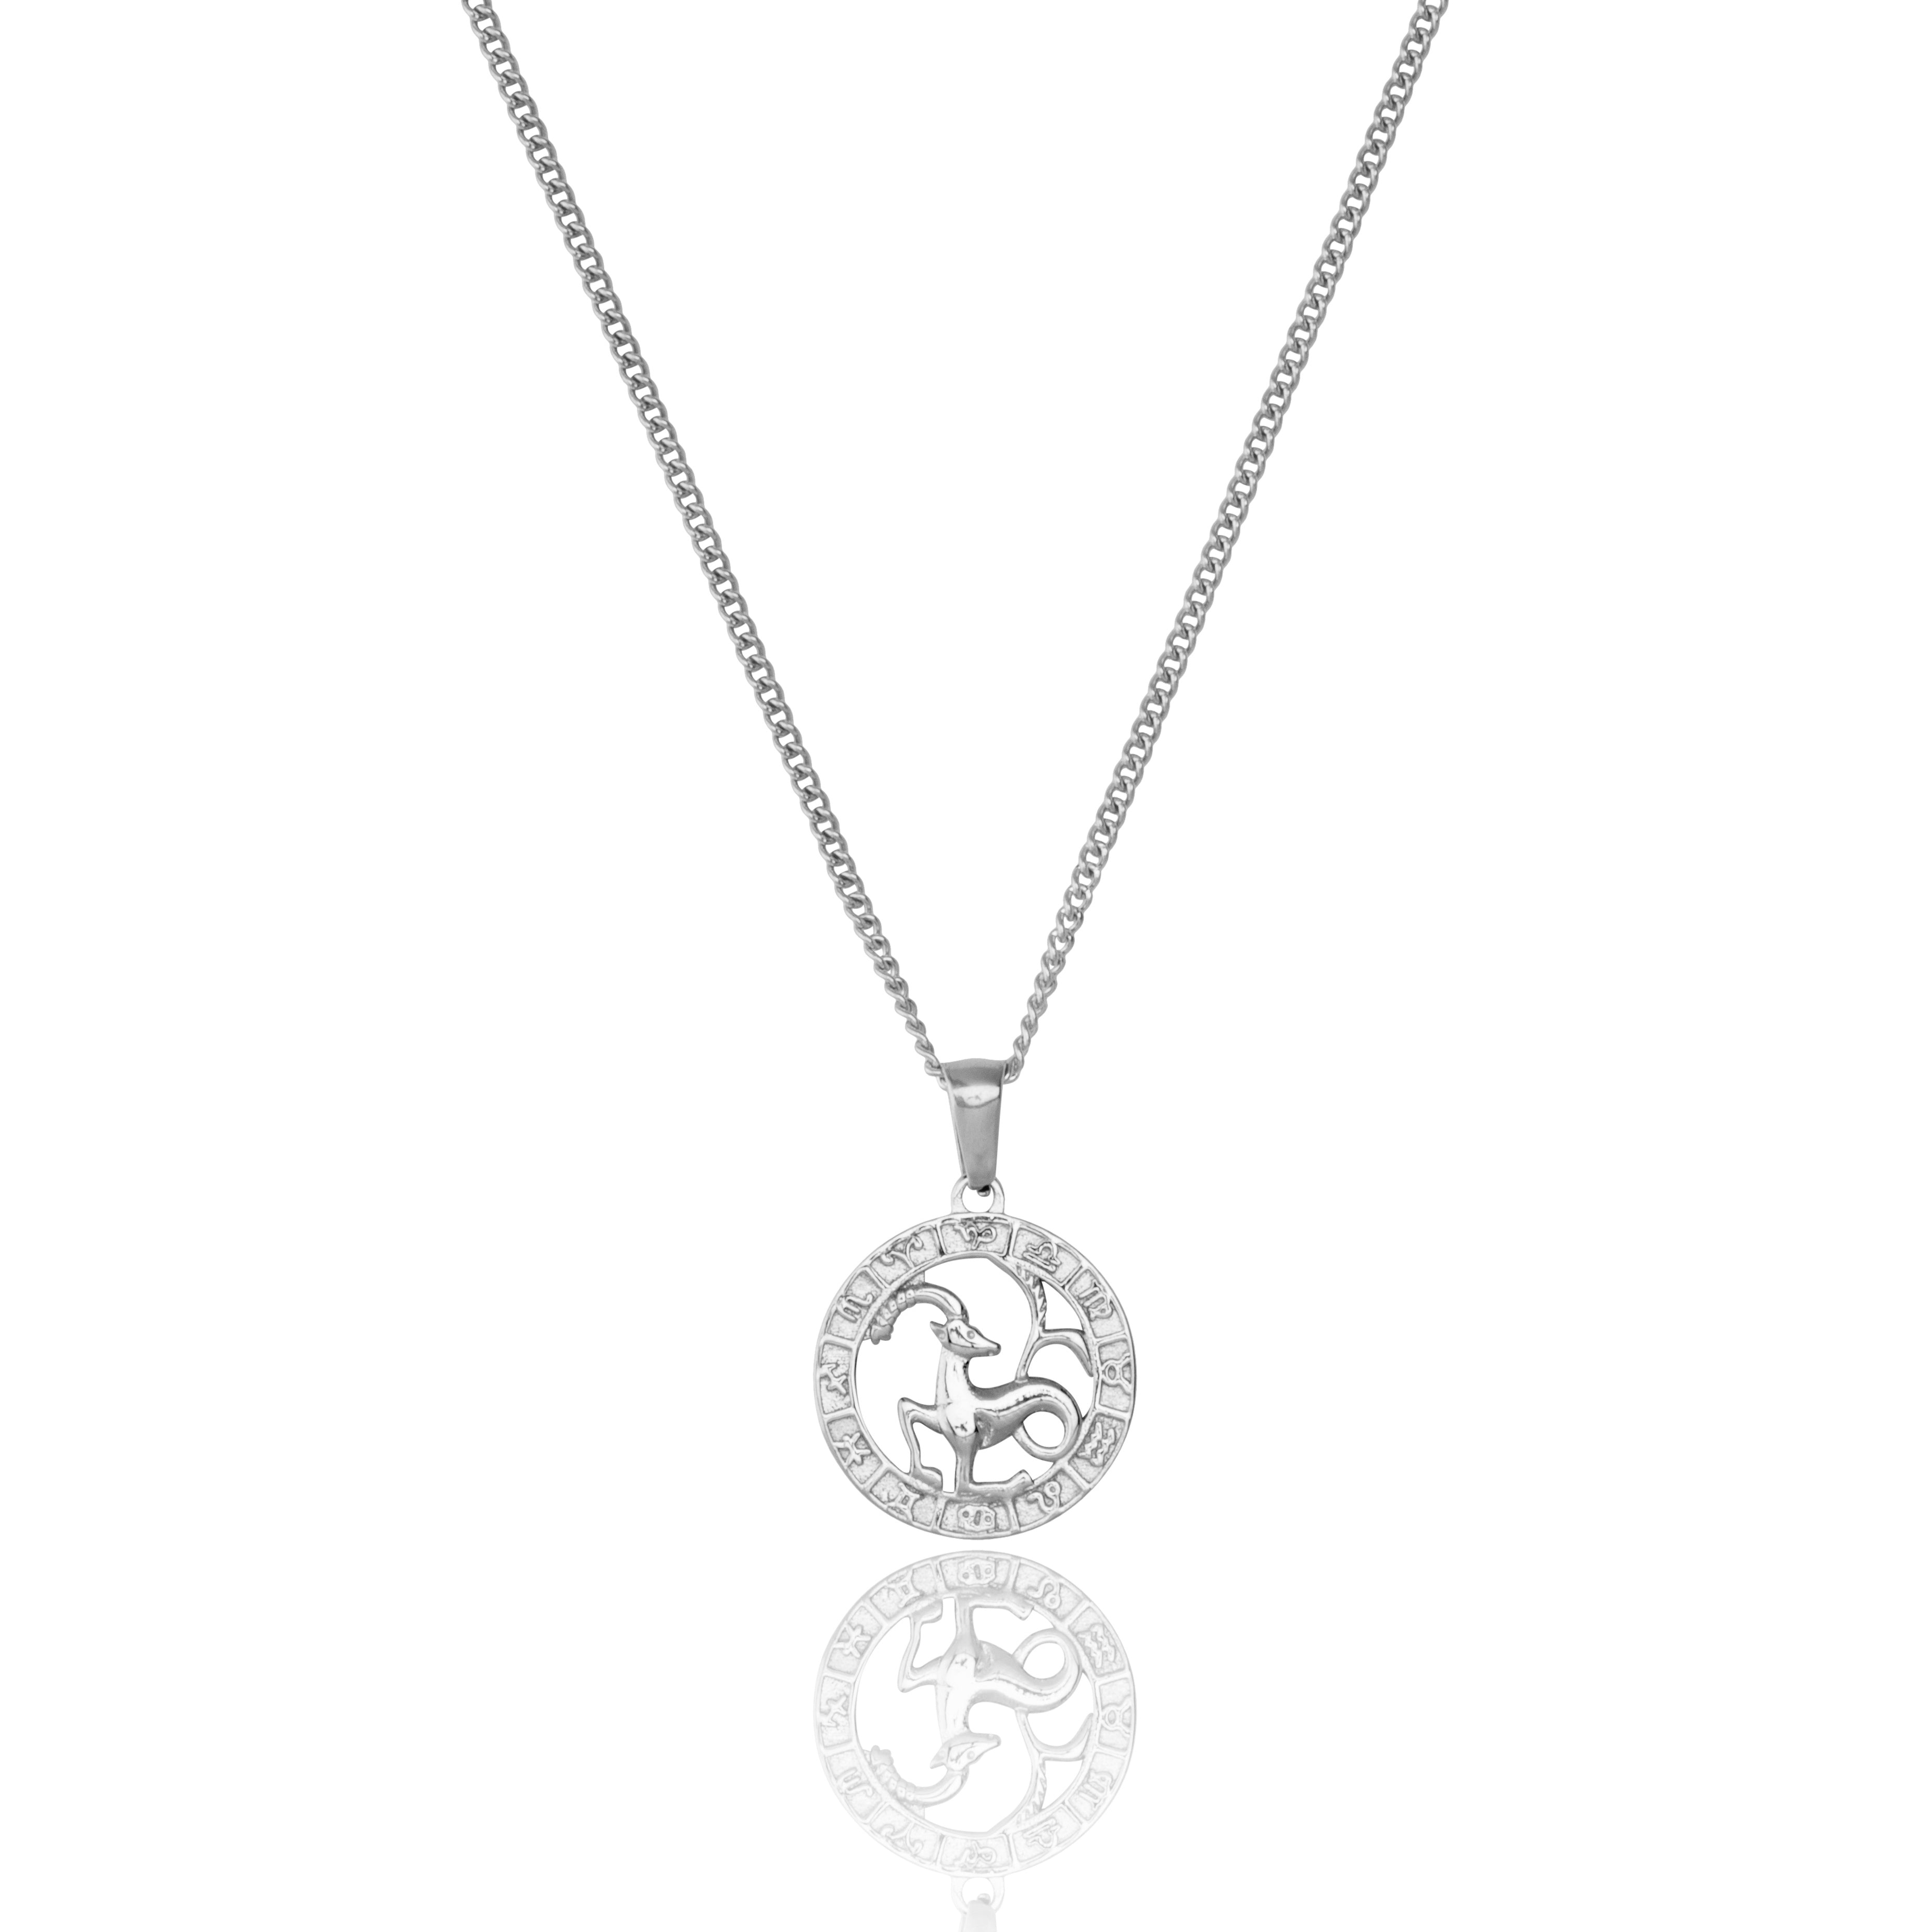 Stainless Steel Plated Capricorn Zodiac Star Sign Pendant and Chain